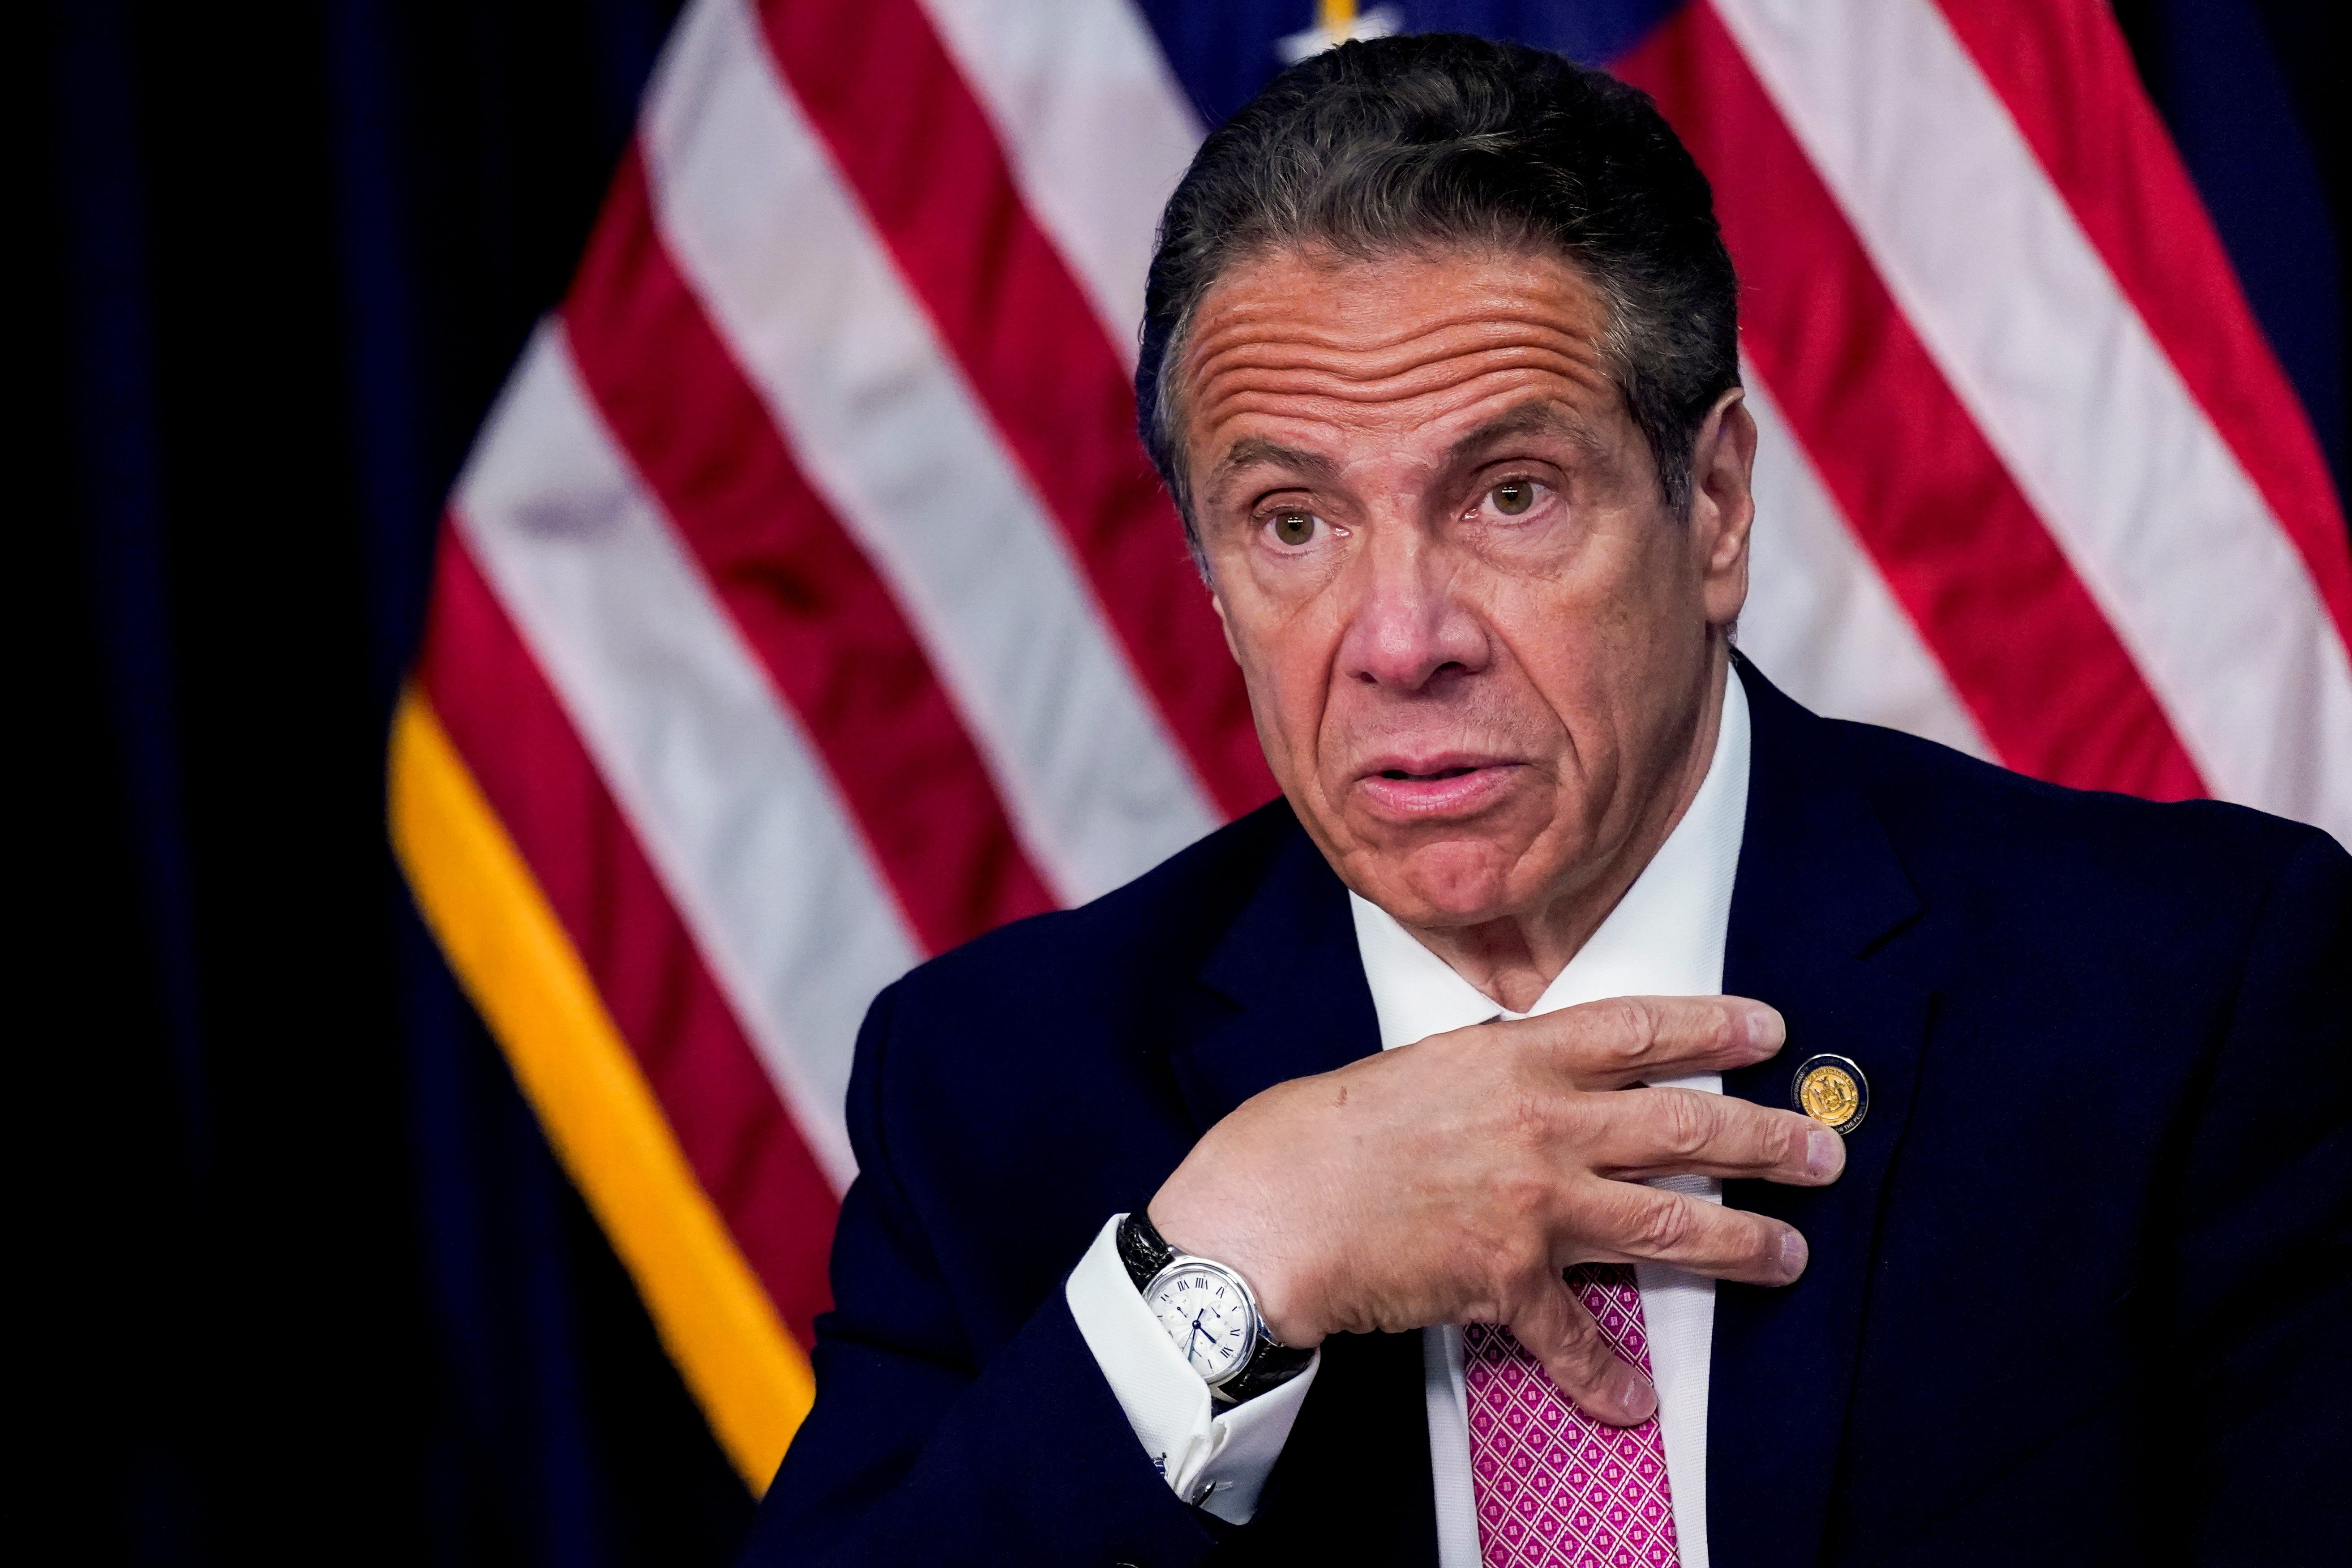 New York Assembly will not seek to impeach Cuomo after he resigns